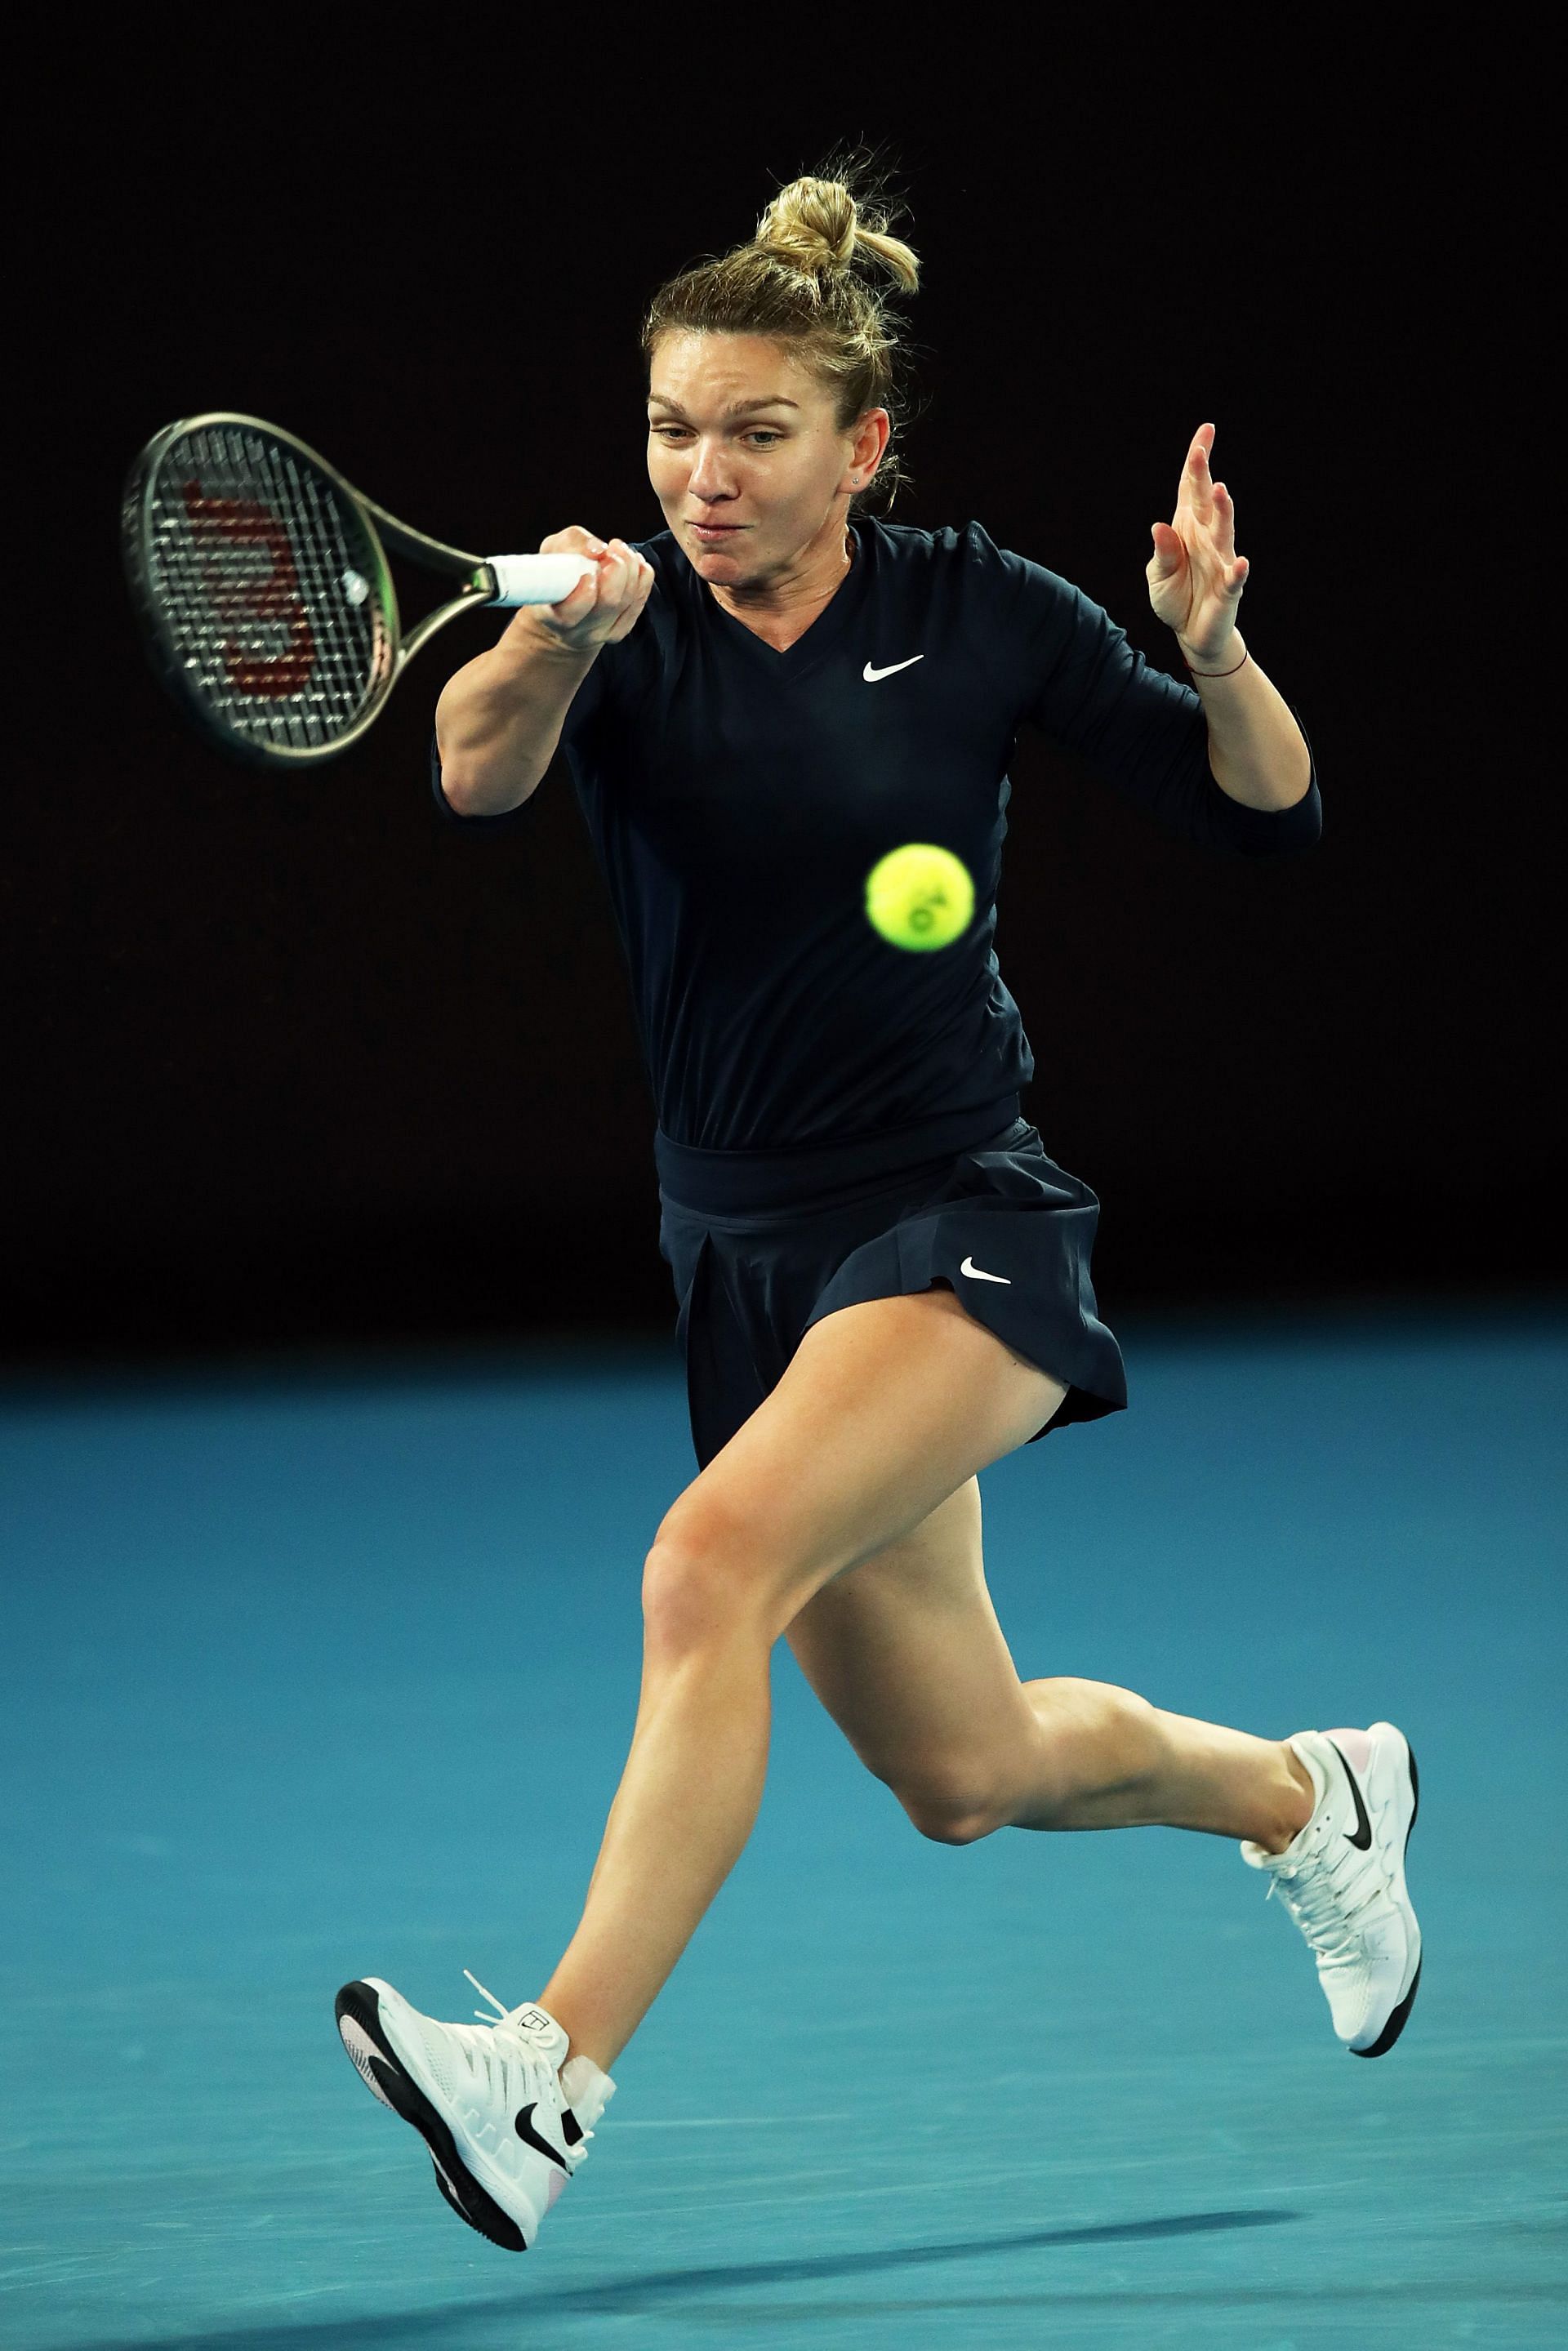 Halep was completely dominant against Destanee Aiava